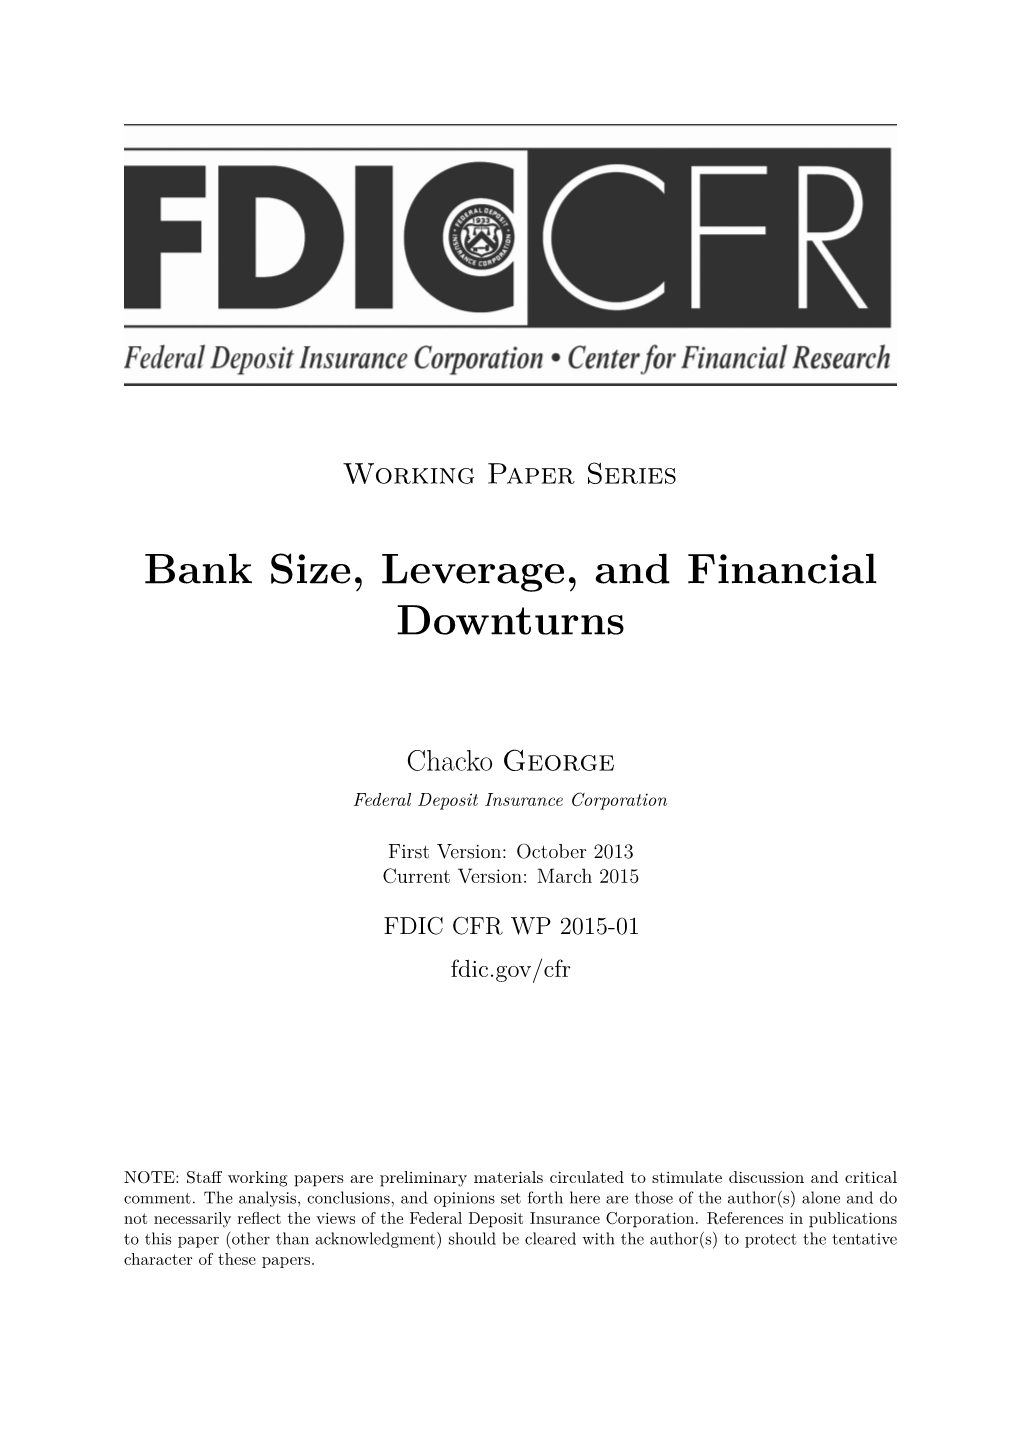 Bank Size, Leverage, and Financial Downturns